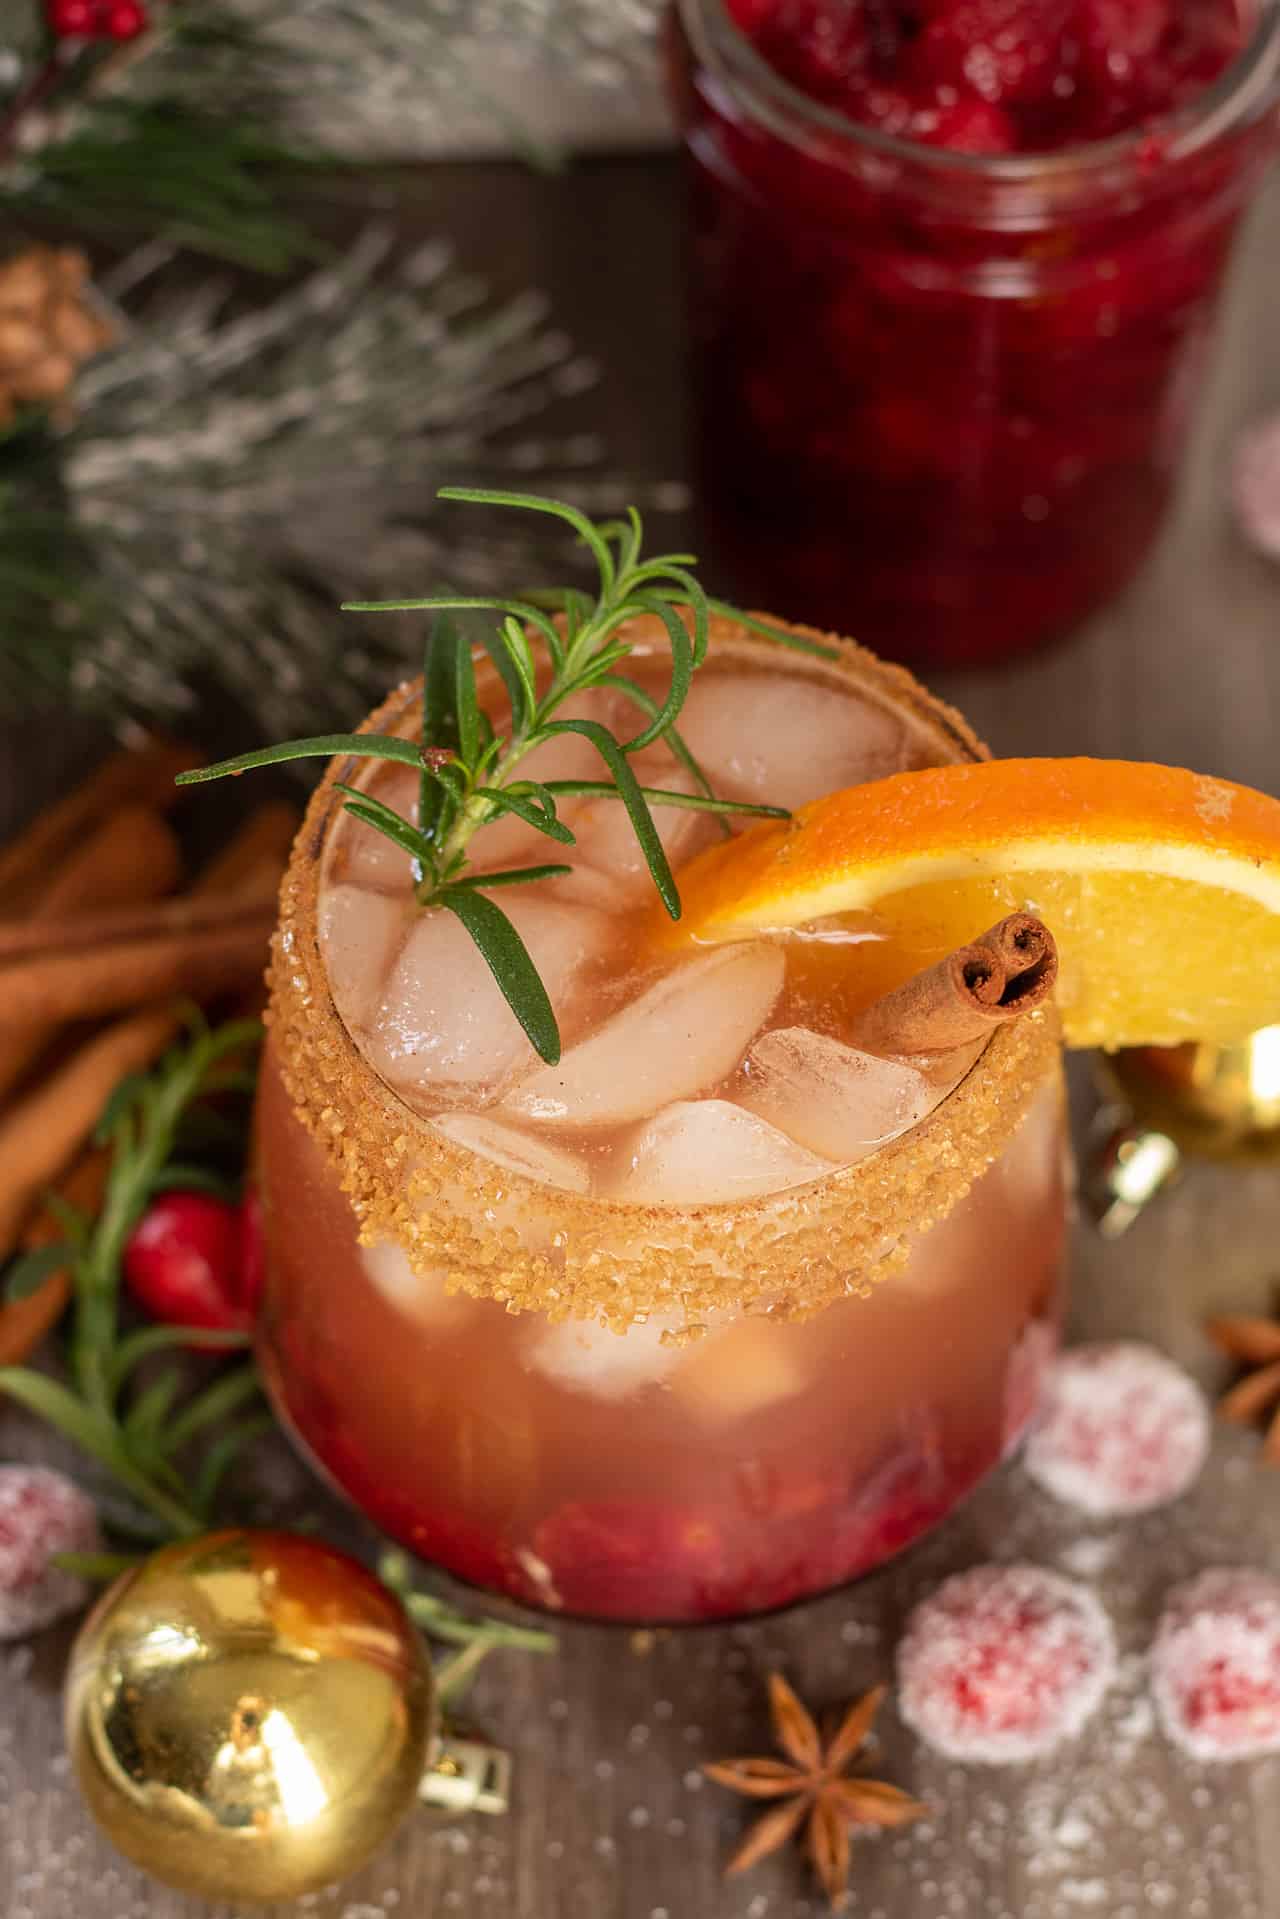 A cocktail glass filled with ice and cranberry bourbon cider. It's got a orange piece hanging on the side of the glass with a cinnamon stick and sprig of fresh rosemary. You can see sugared cranberries next to the glass with cinnamon sticks and a jar of cranberry syrup in the background